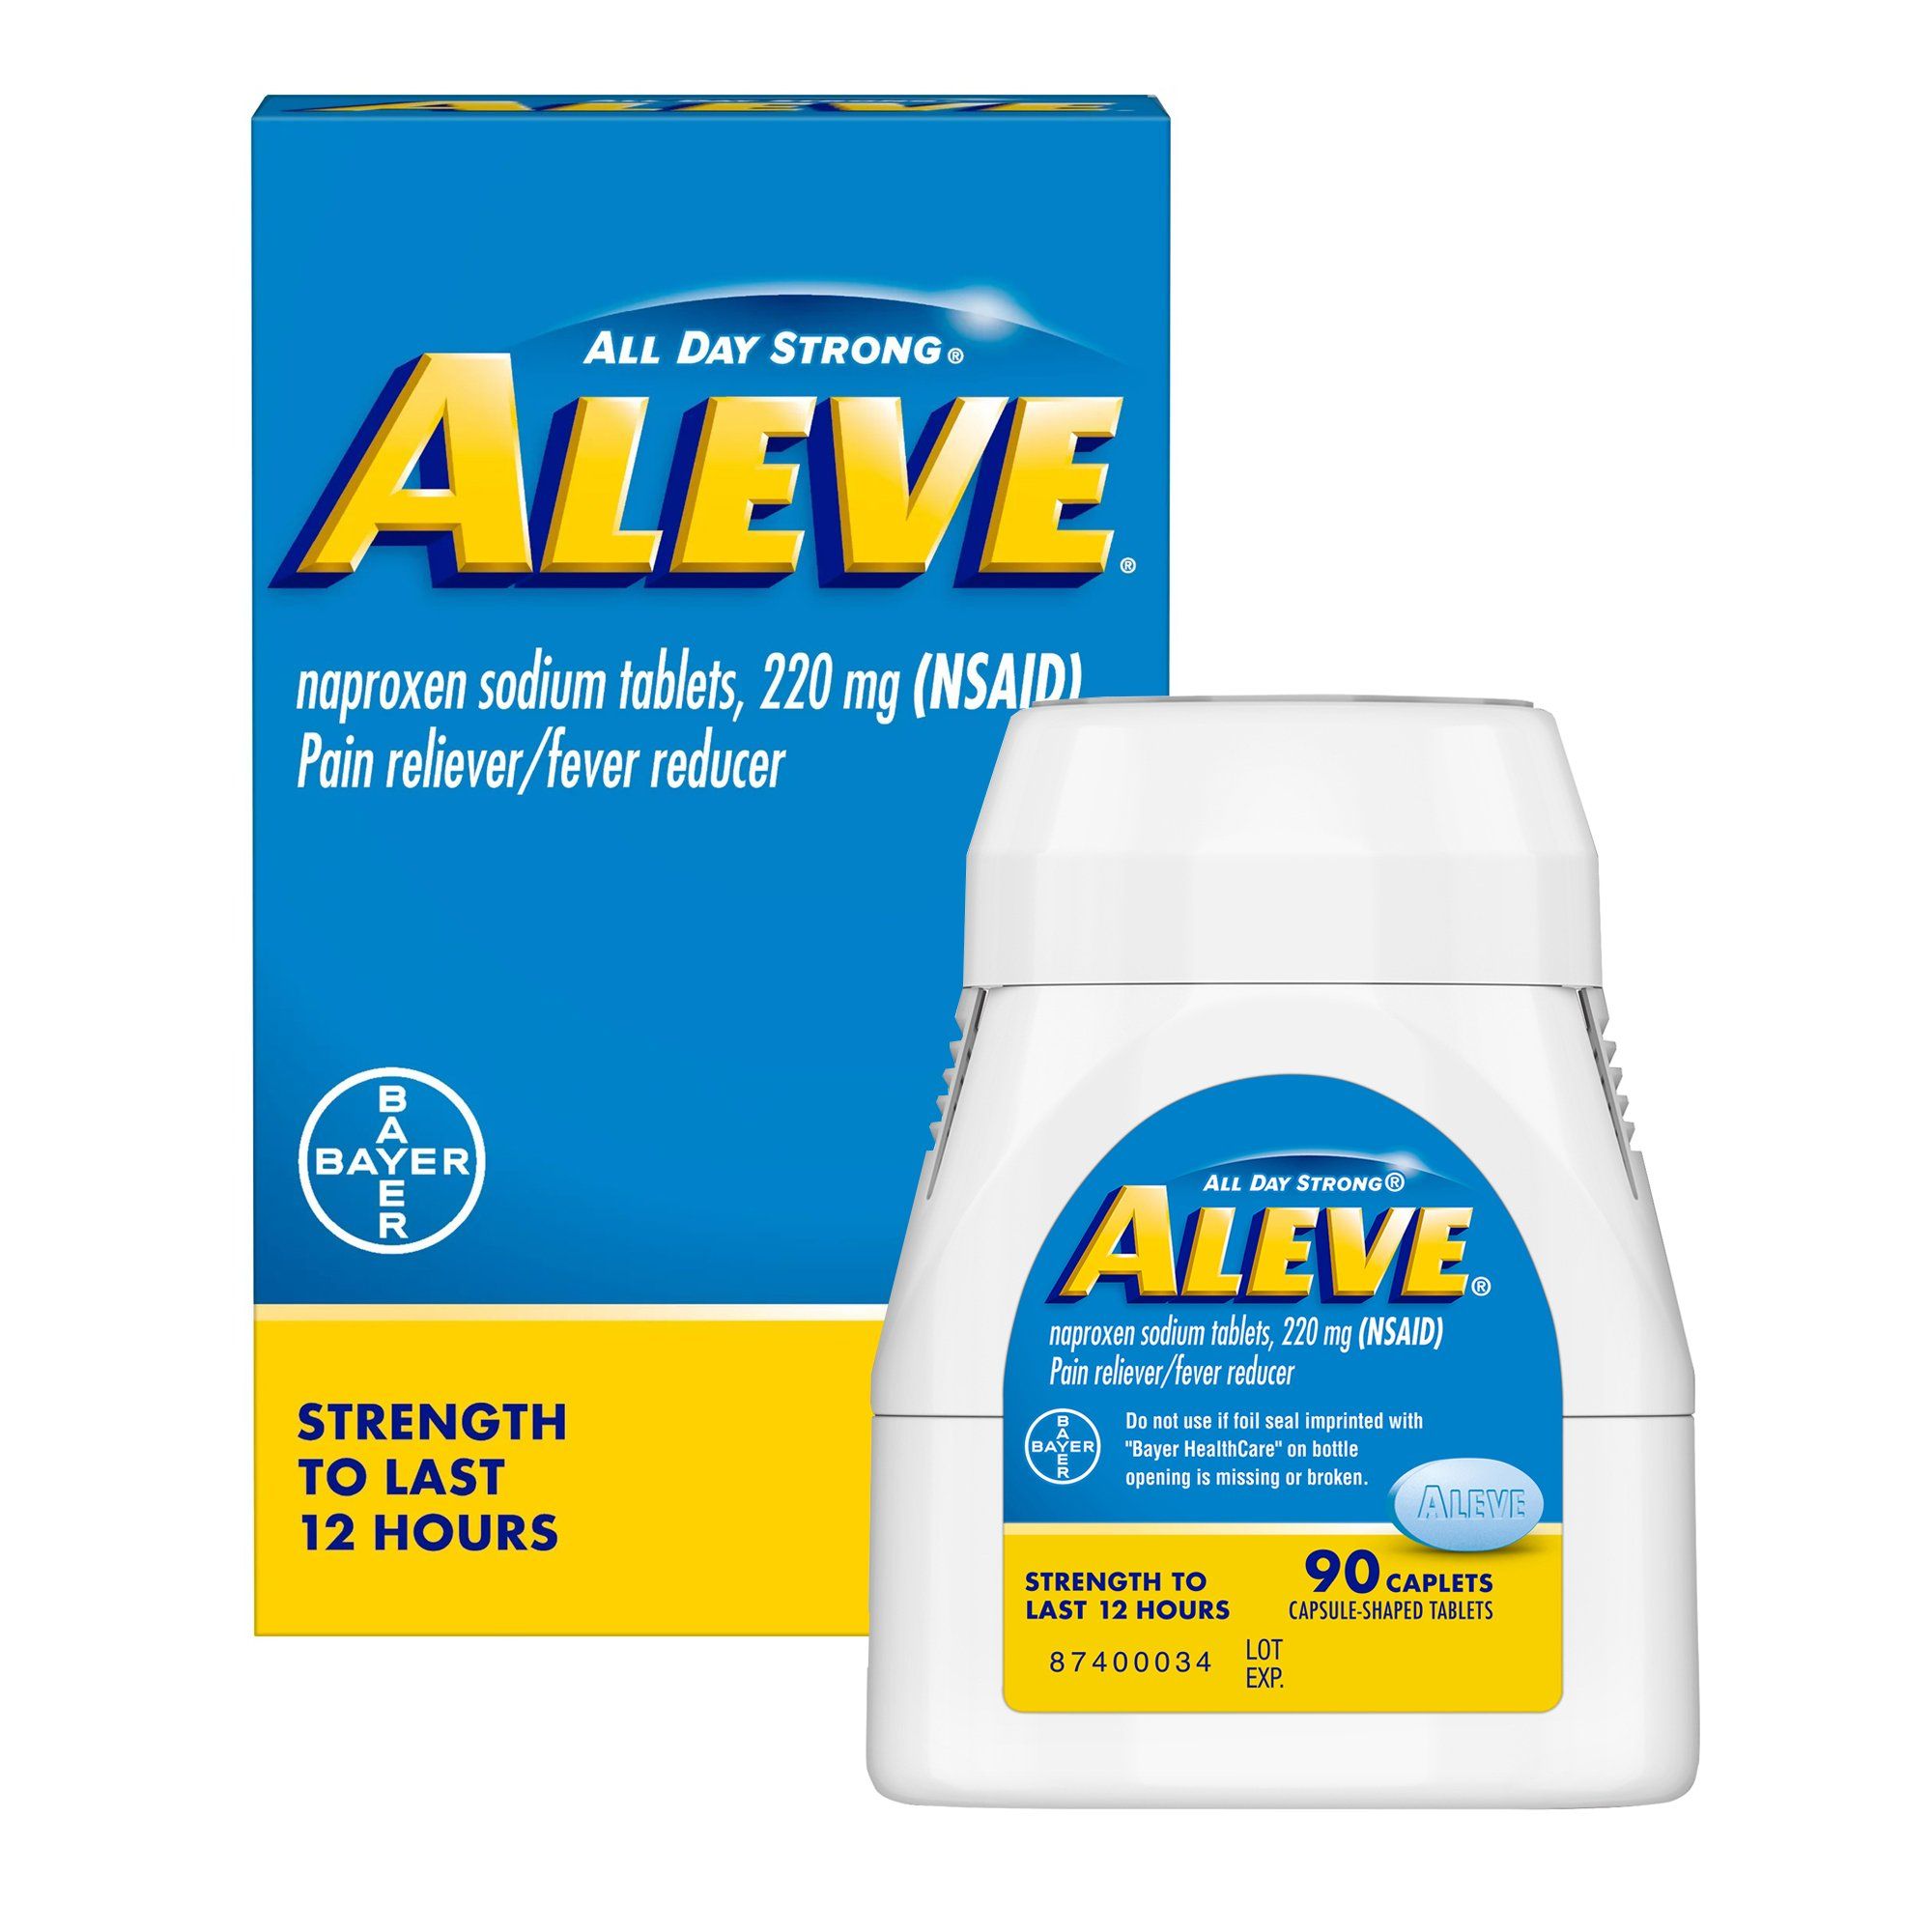 Aleve Naproxen Sodium Pain Relief Tablets, 220 mg - 90 ct